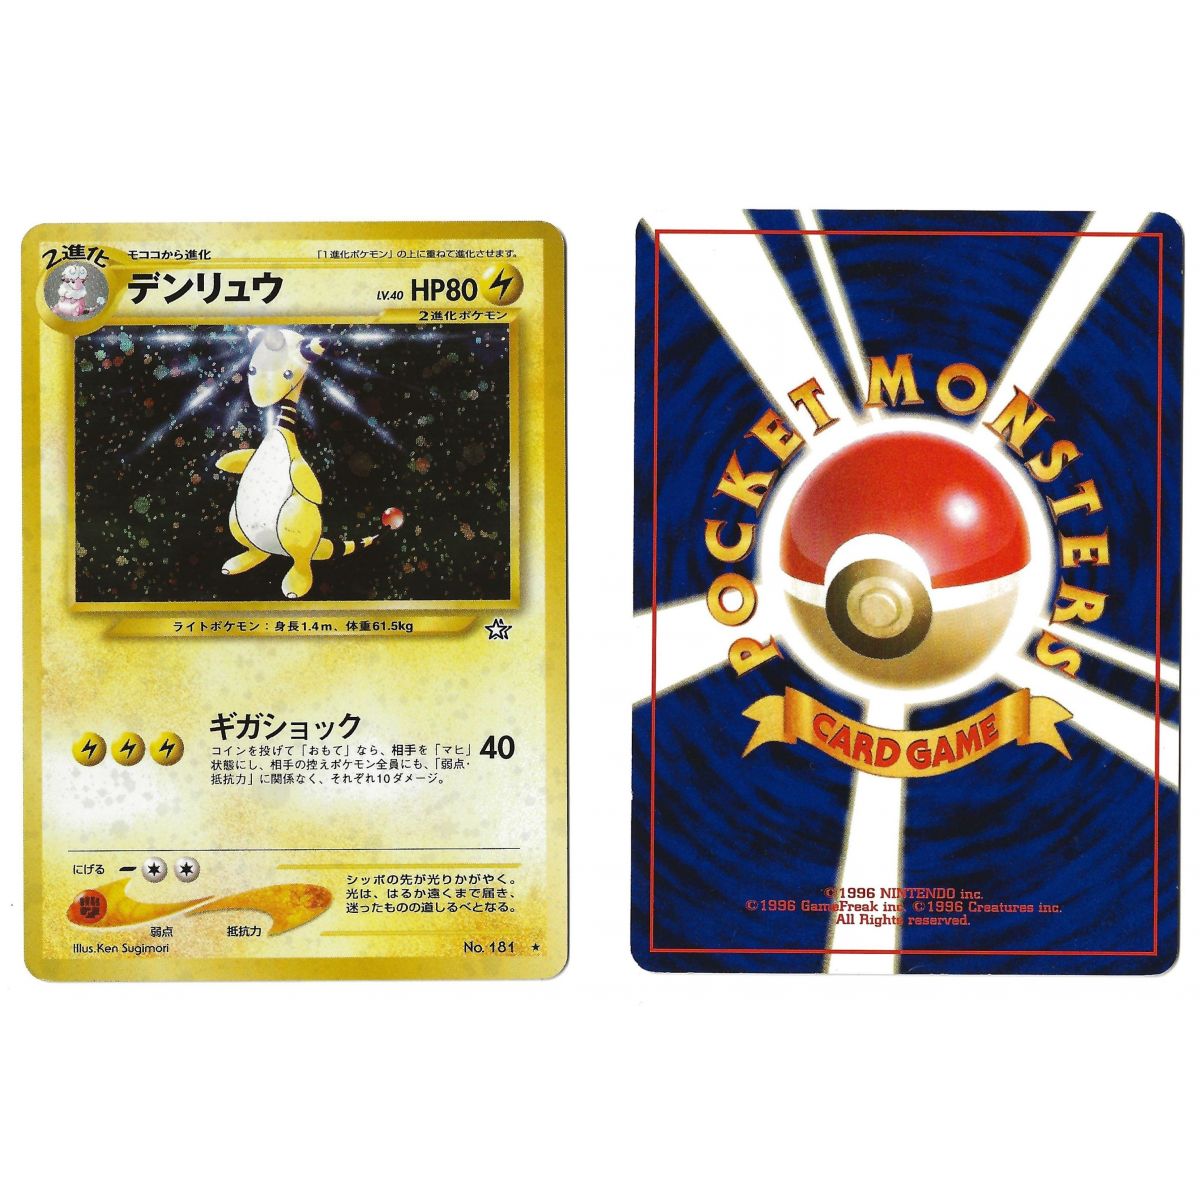 Item Ampharos (2) No.181 Gold, Silver, to a New World... N1 Holo Unlimited Japonais Voir Scan